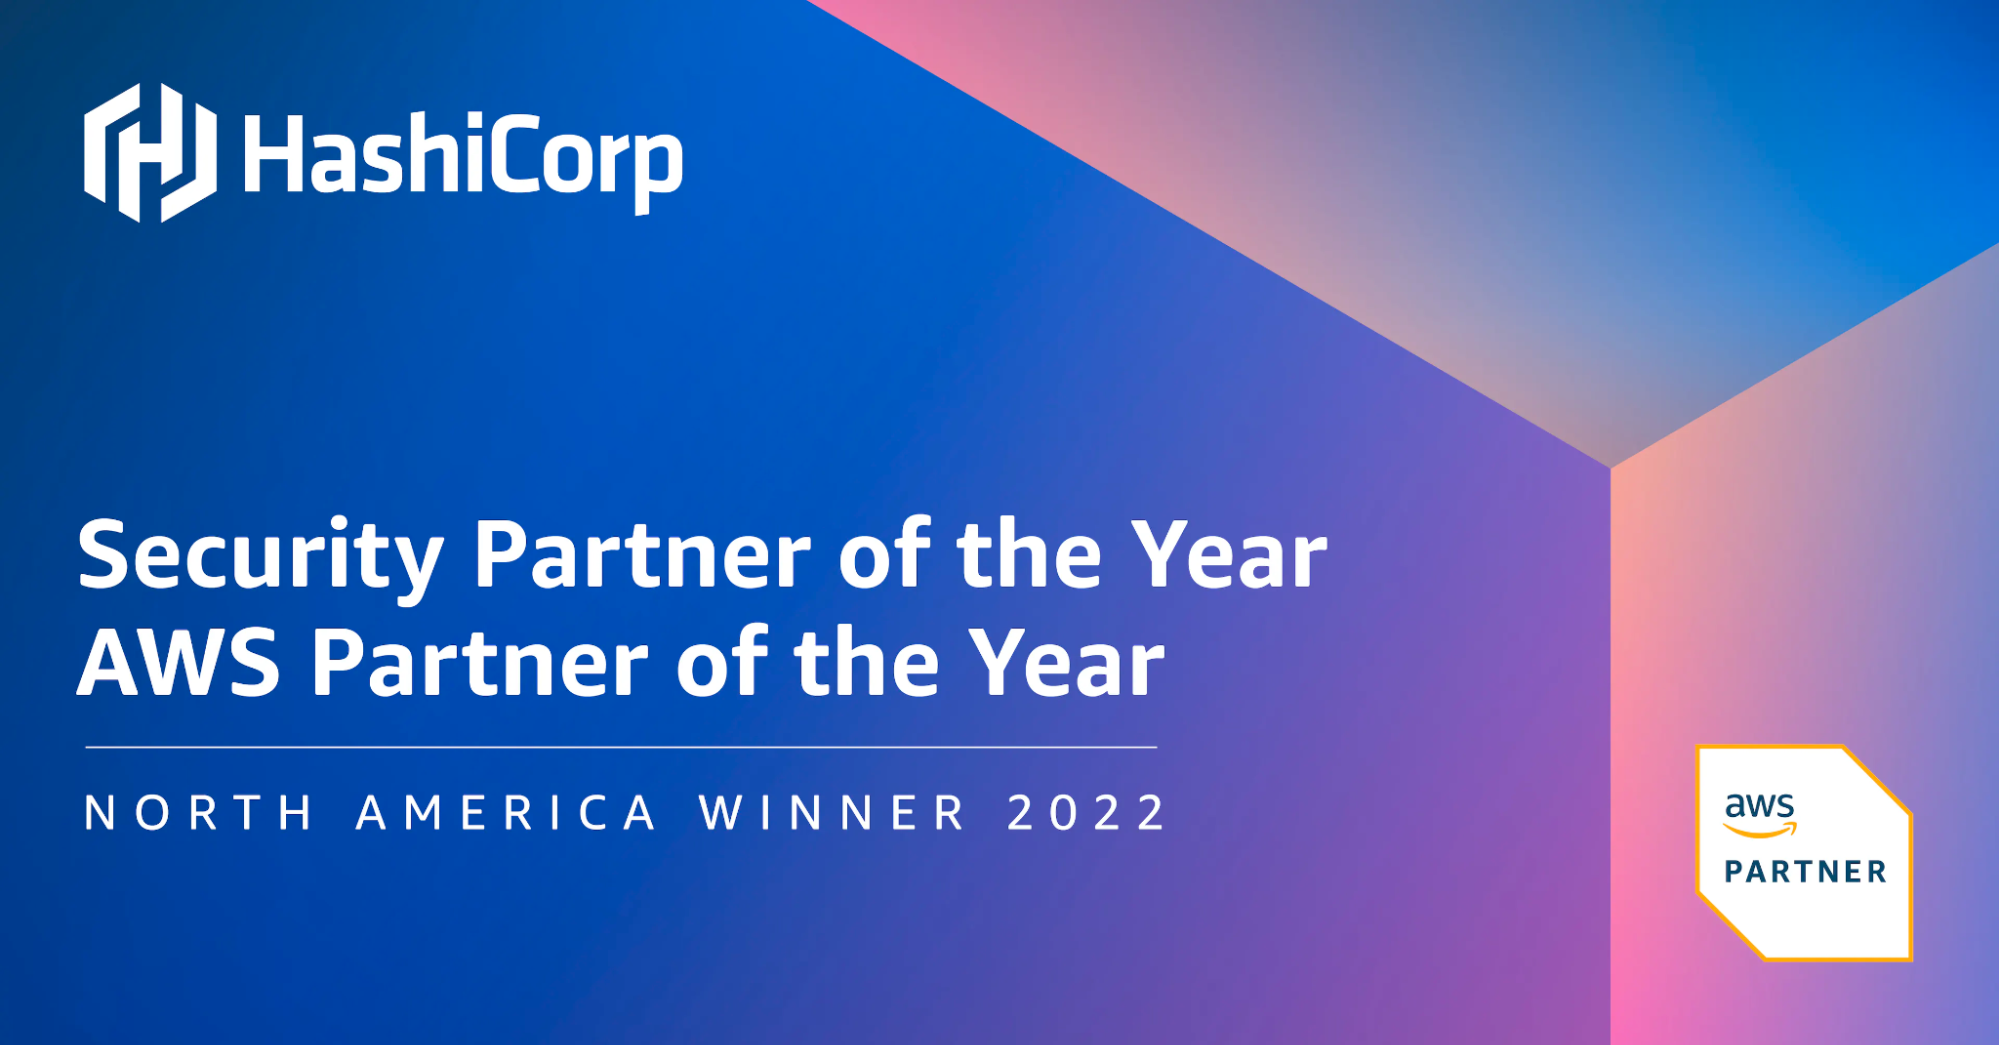 HashiCorp is AWS’ Security Partner of the Year in North America